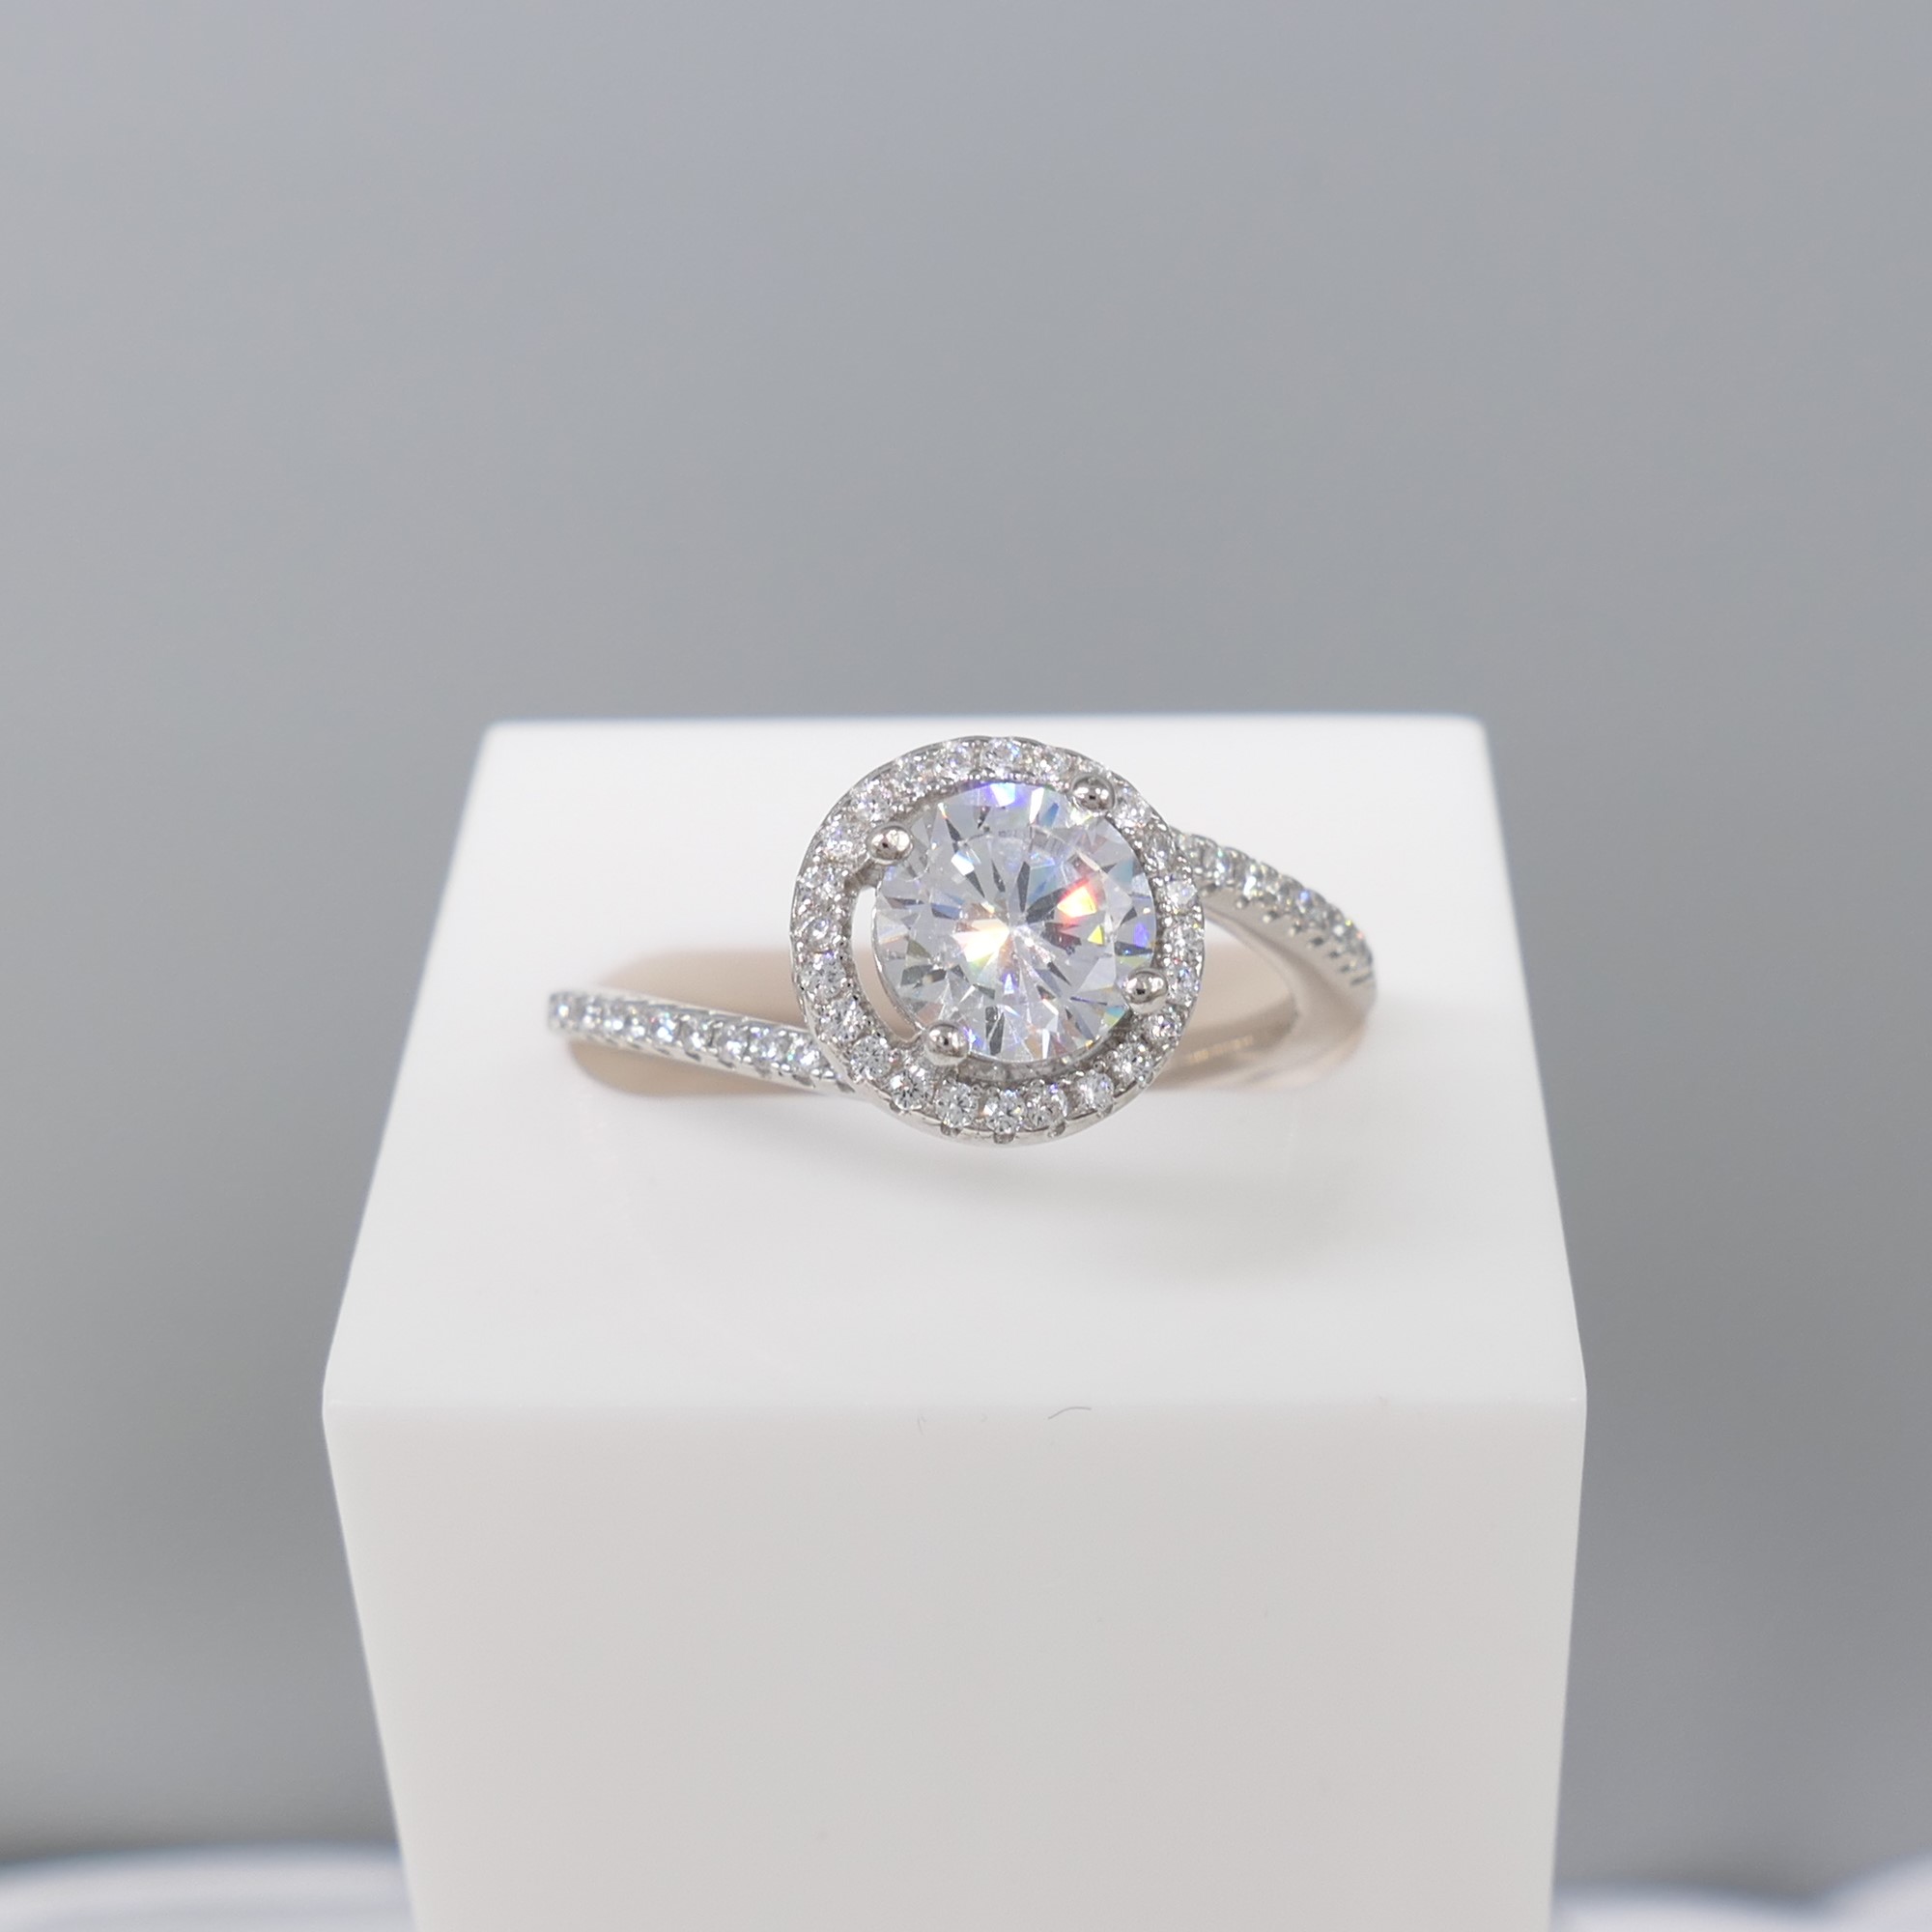 Silver cubic zirconia halo and twist dress ring - Image 6 of 6